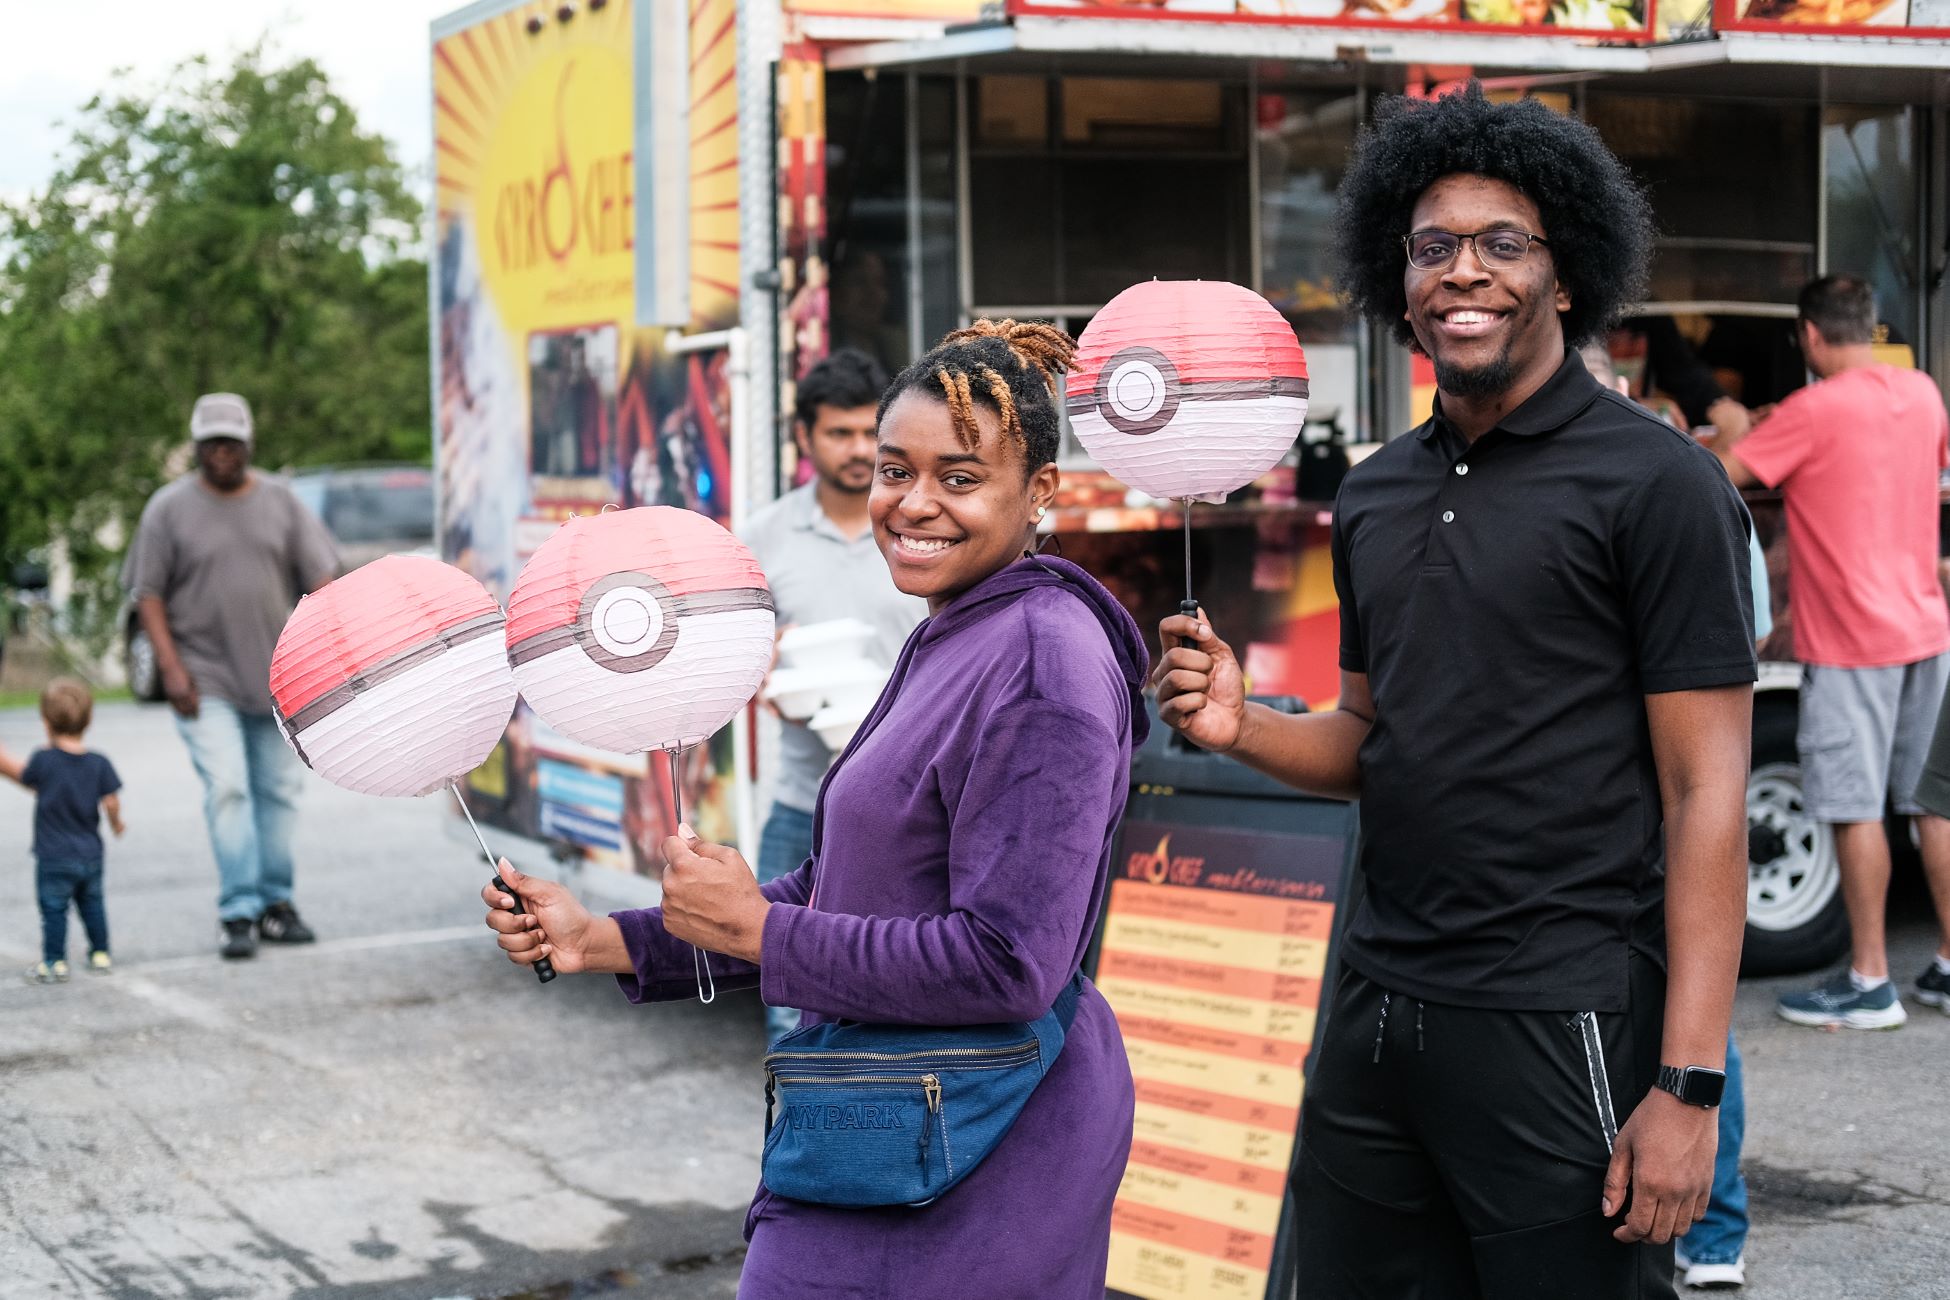 Two guests enjoy the Pre-Parade festivities. They are holding up lanterns that look like pokemon balls. In the background is a food truck.